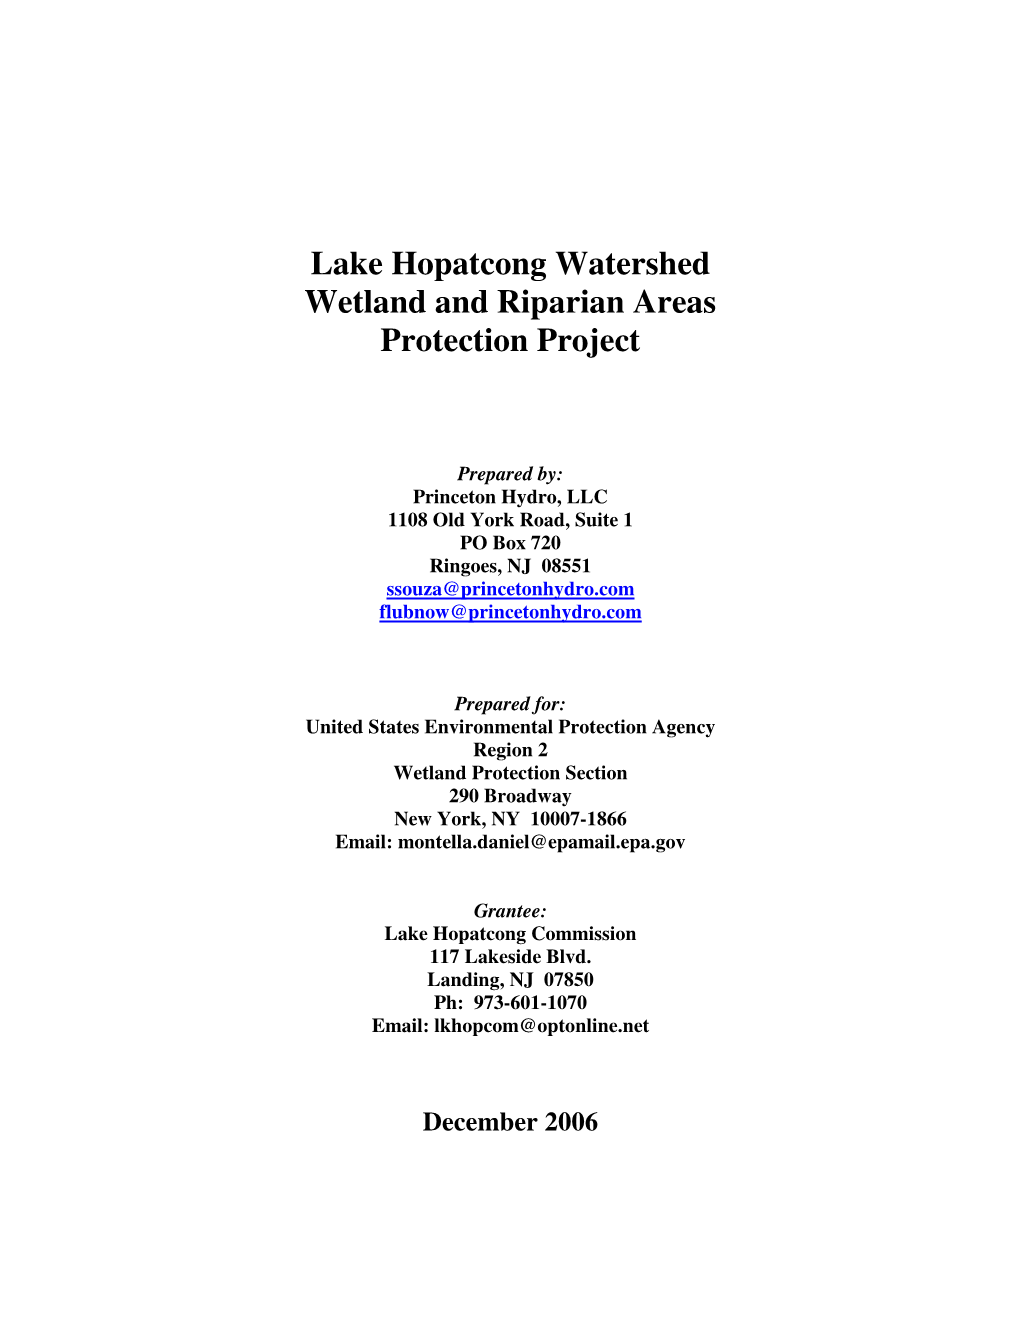 Lake Hopatcong Watershed Wetland and Riparian Areas Protection Project